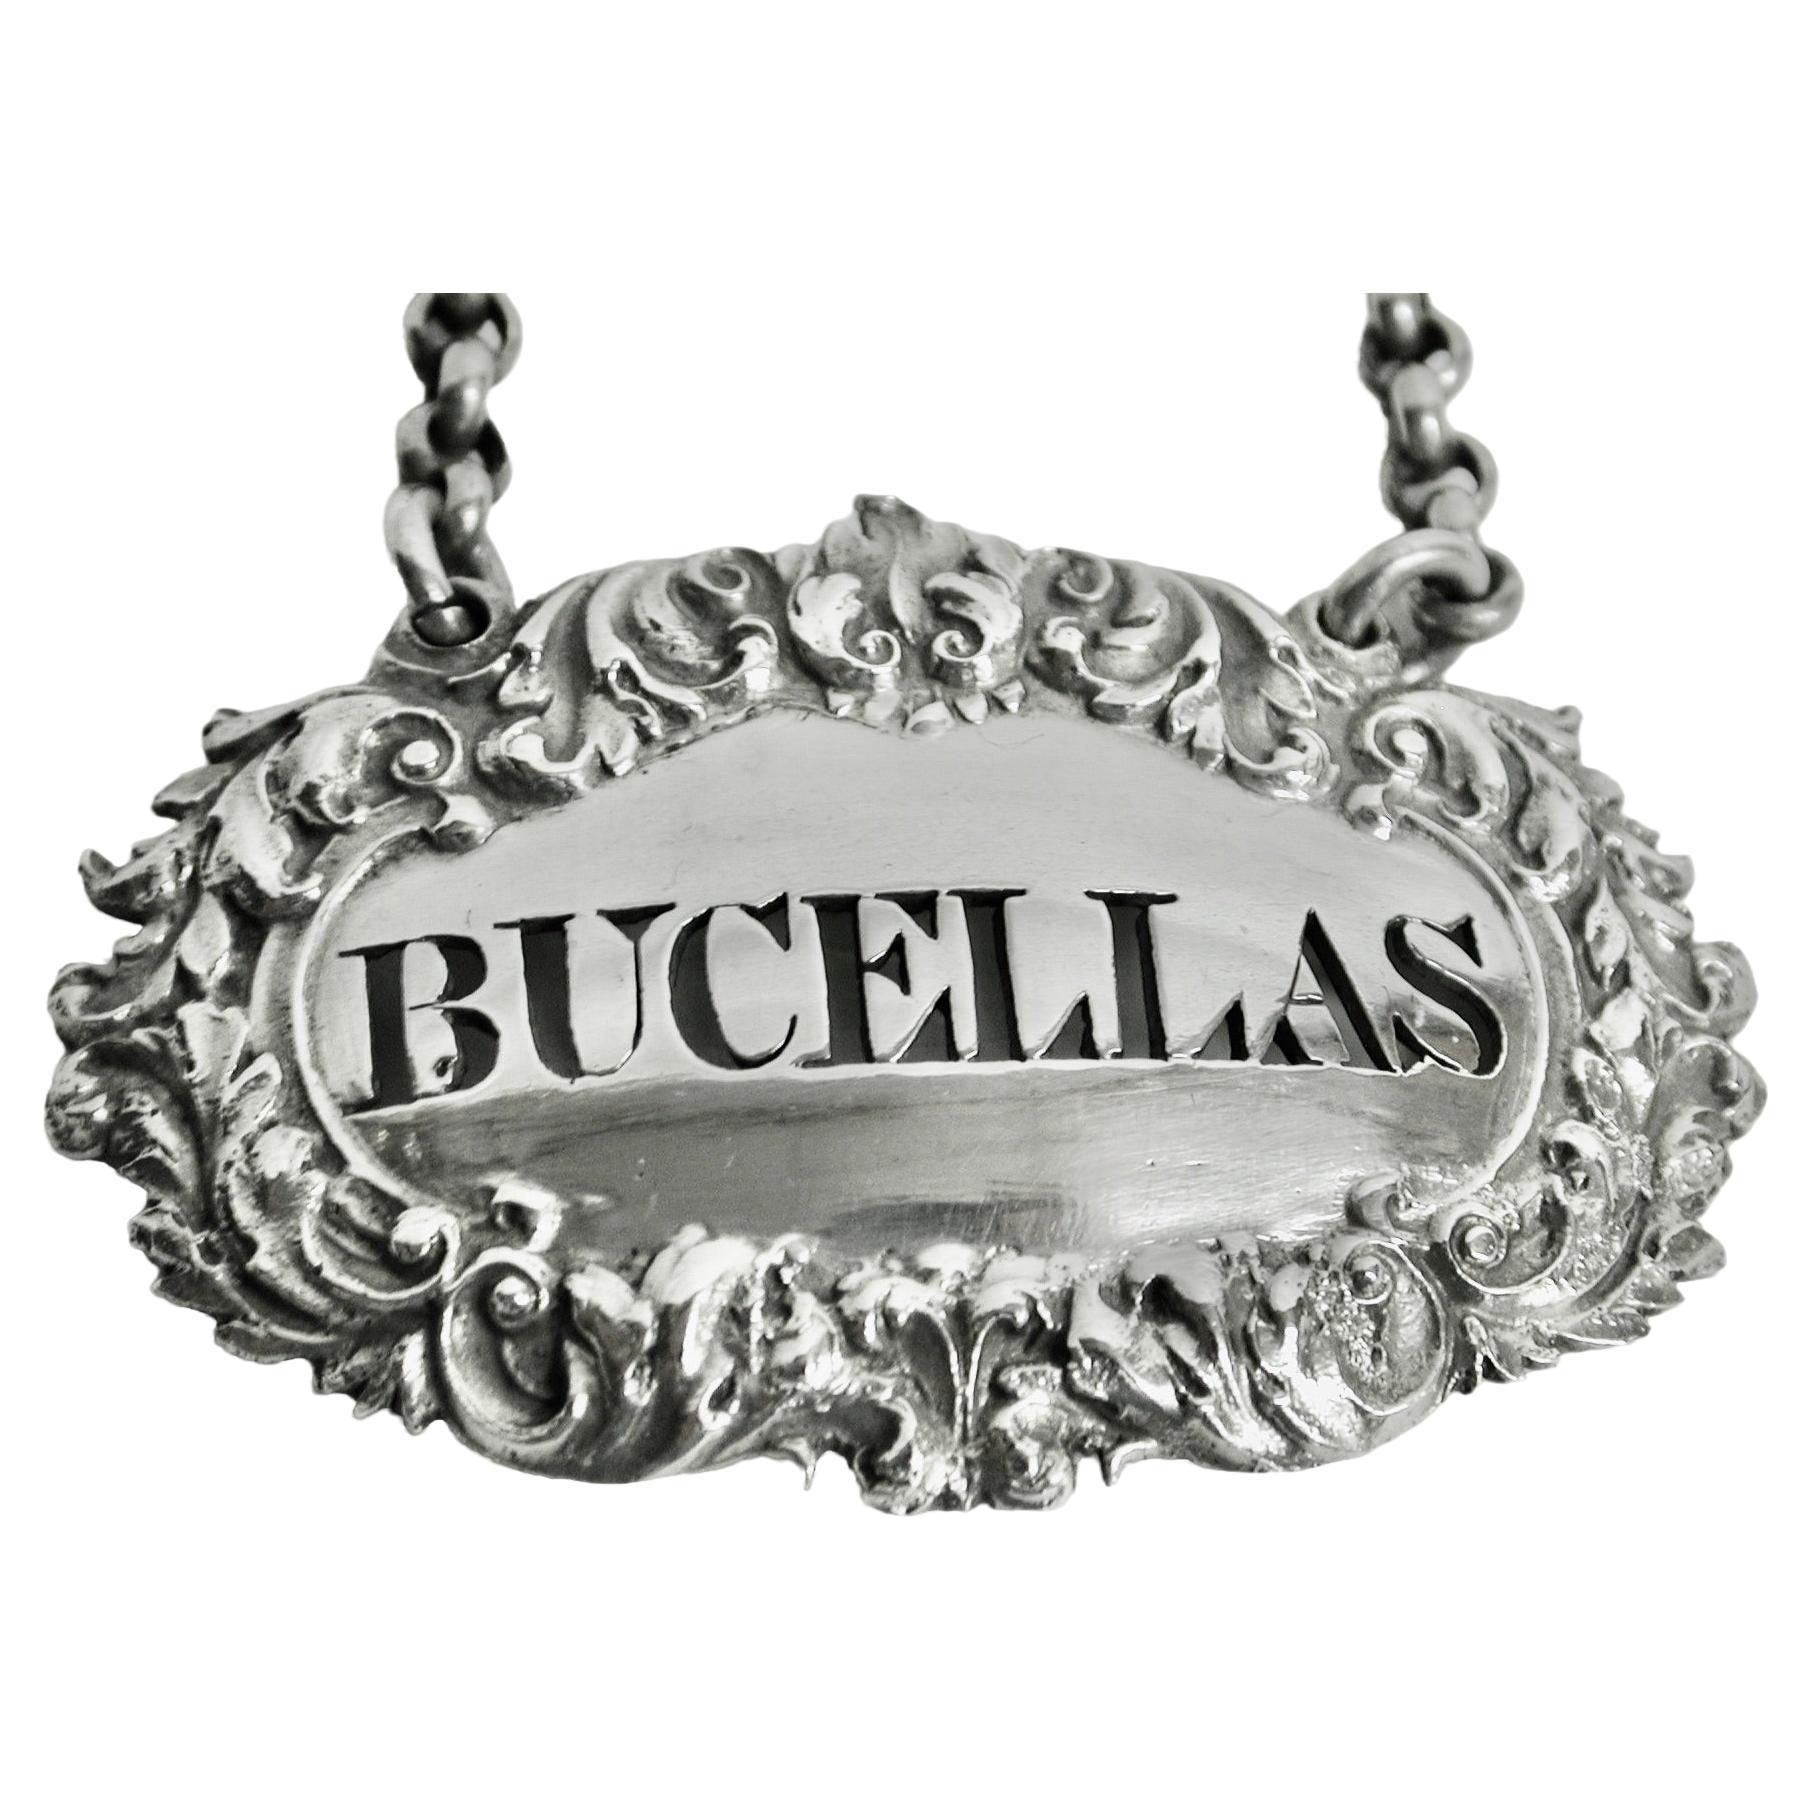 Antique George 1V Silver Bucellas Wine Label Dated 1828 London Charles Rawlings
A  heavy beautifully cast wine label with hand pierced bucellas.
This maker specialised in making fine quality wine labels
Bucellas is a white wine from a village near